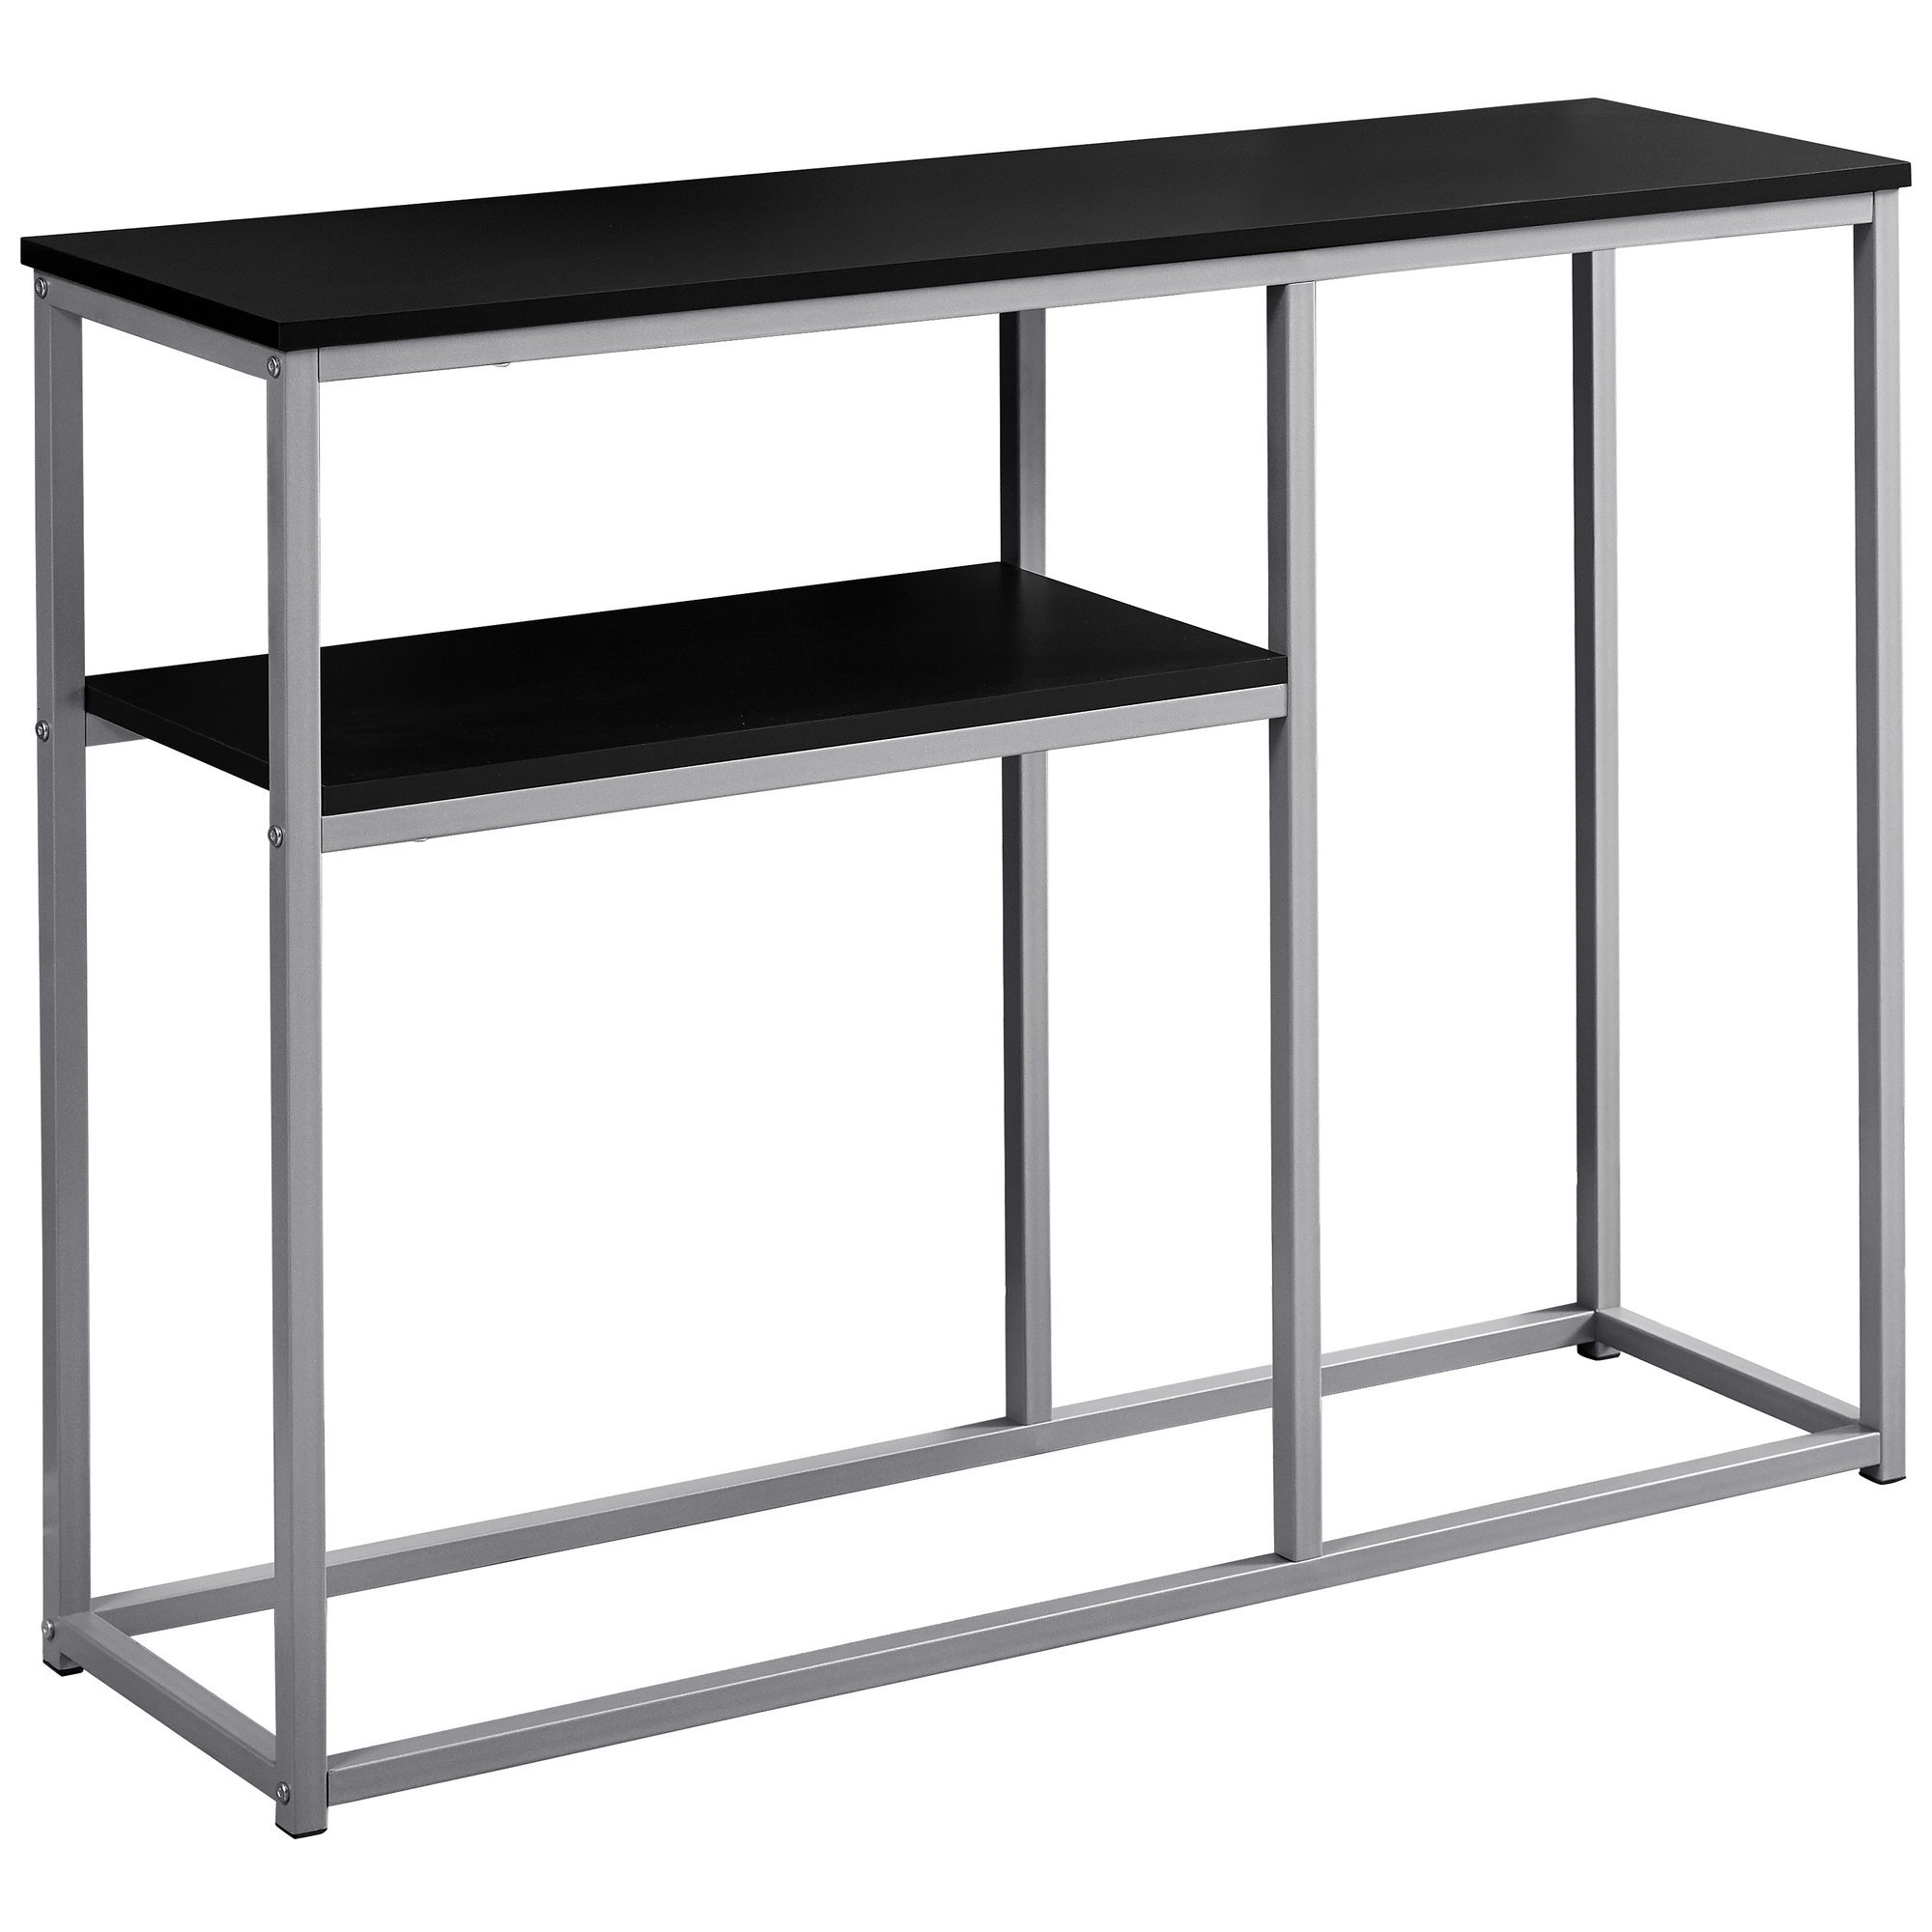 monarch mdf and metal accent table black finish gwg dog kennel end pulaski display cabinet tray counter height kitchen set hobby lobby coffee transition floor trim lucite dining